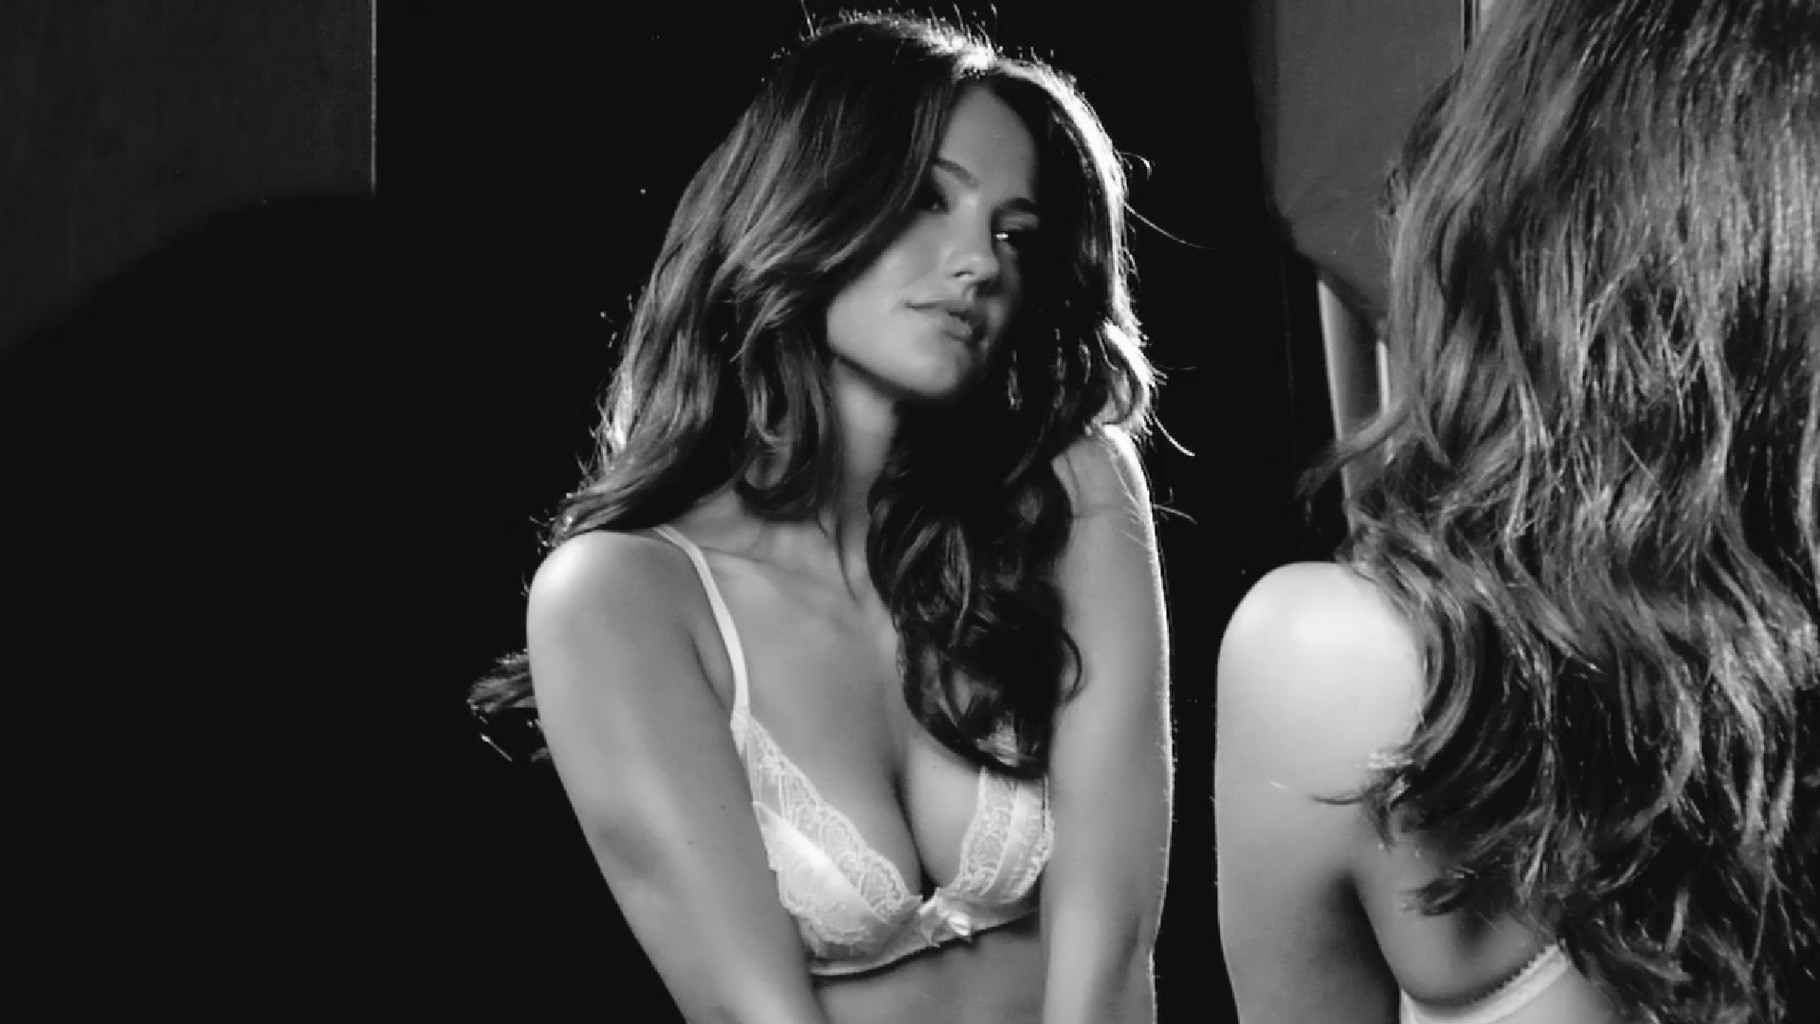 Minka Kelly busty in some black and white lingerie for Esquire #75197817